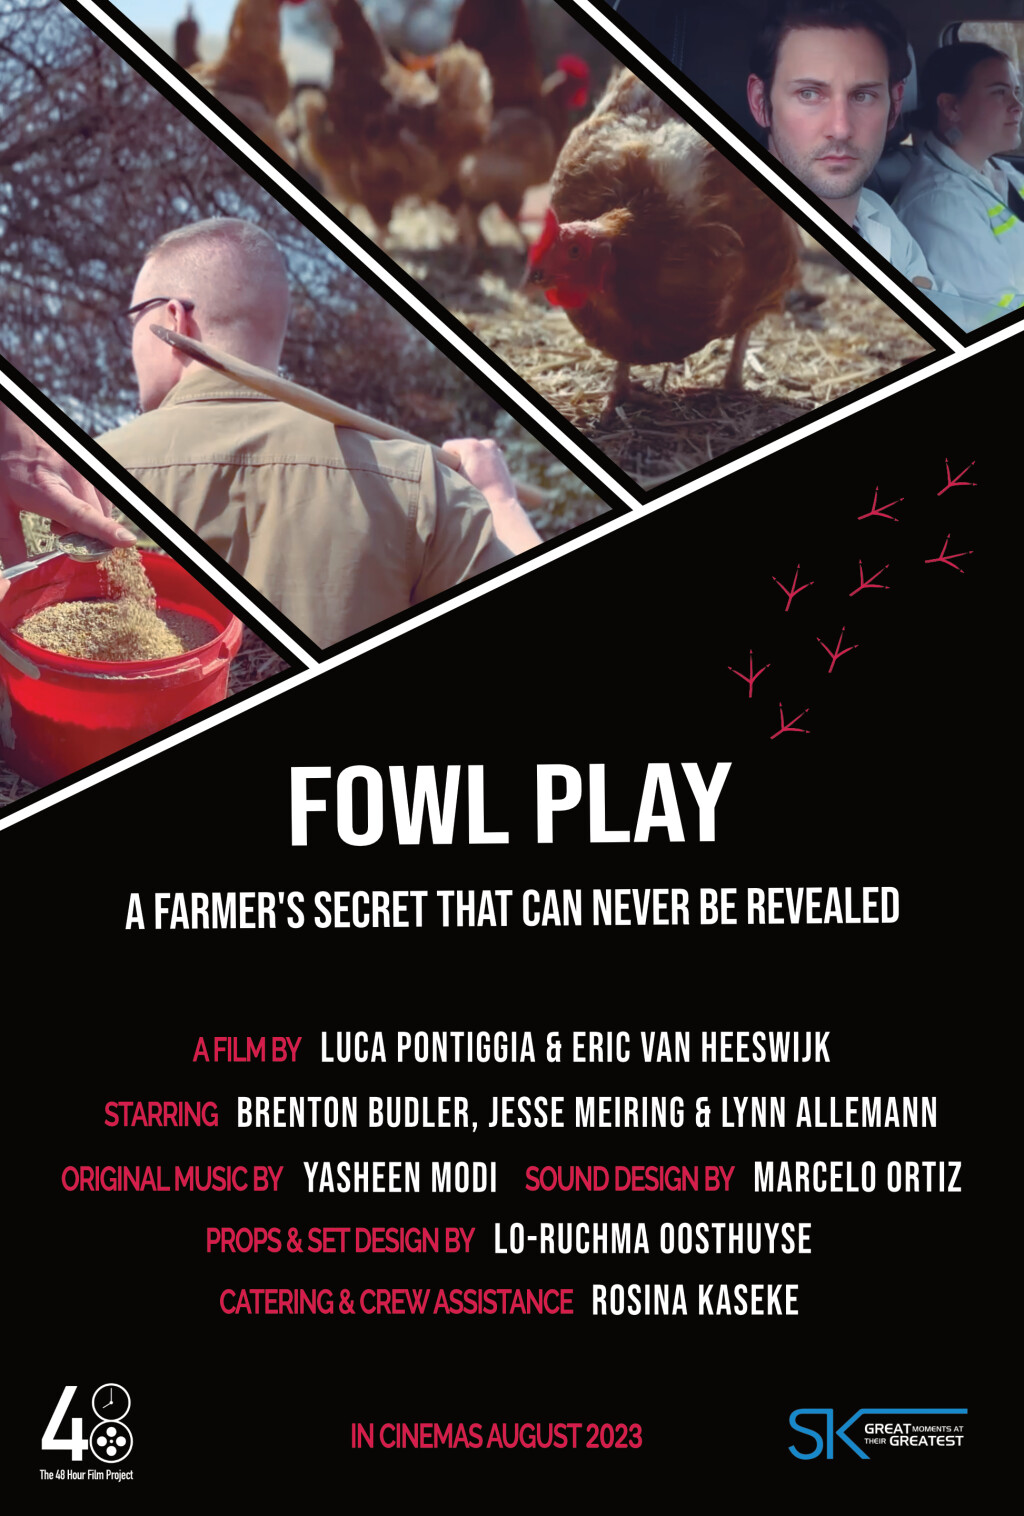 Filmposter for Fowl Play